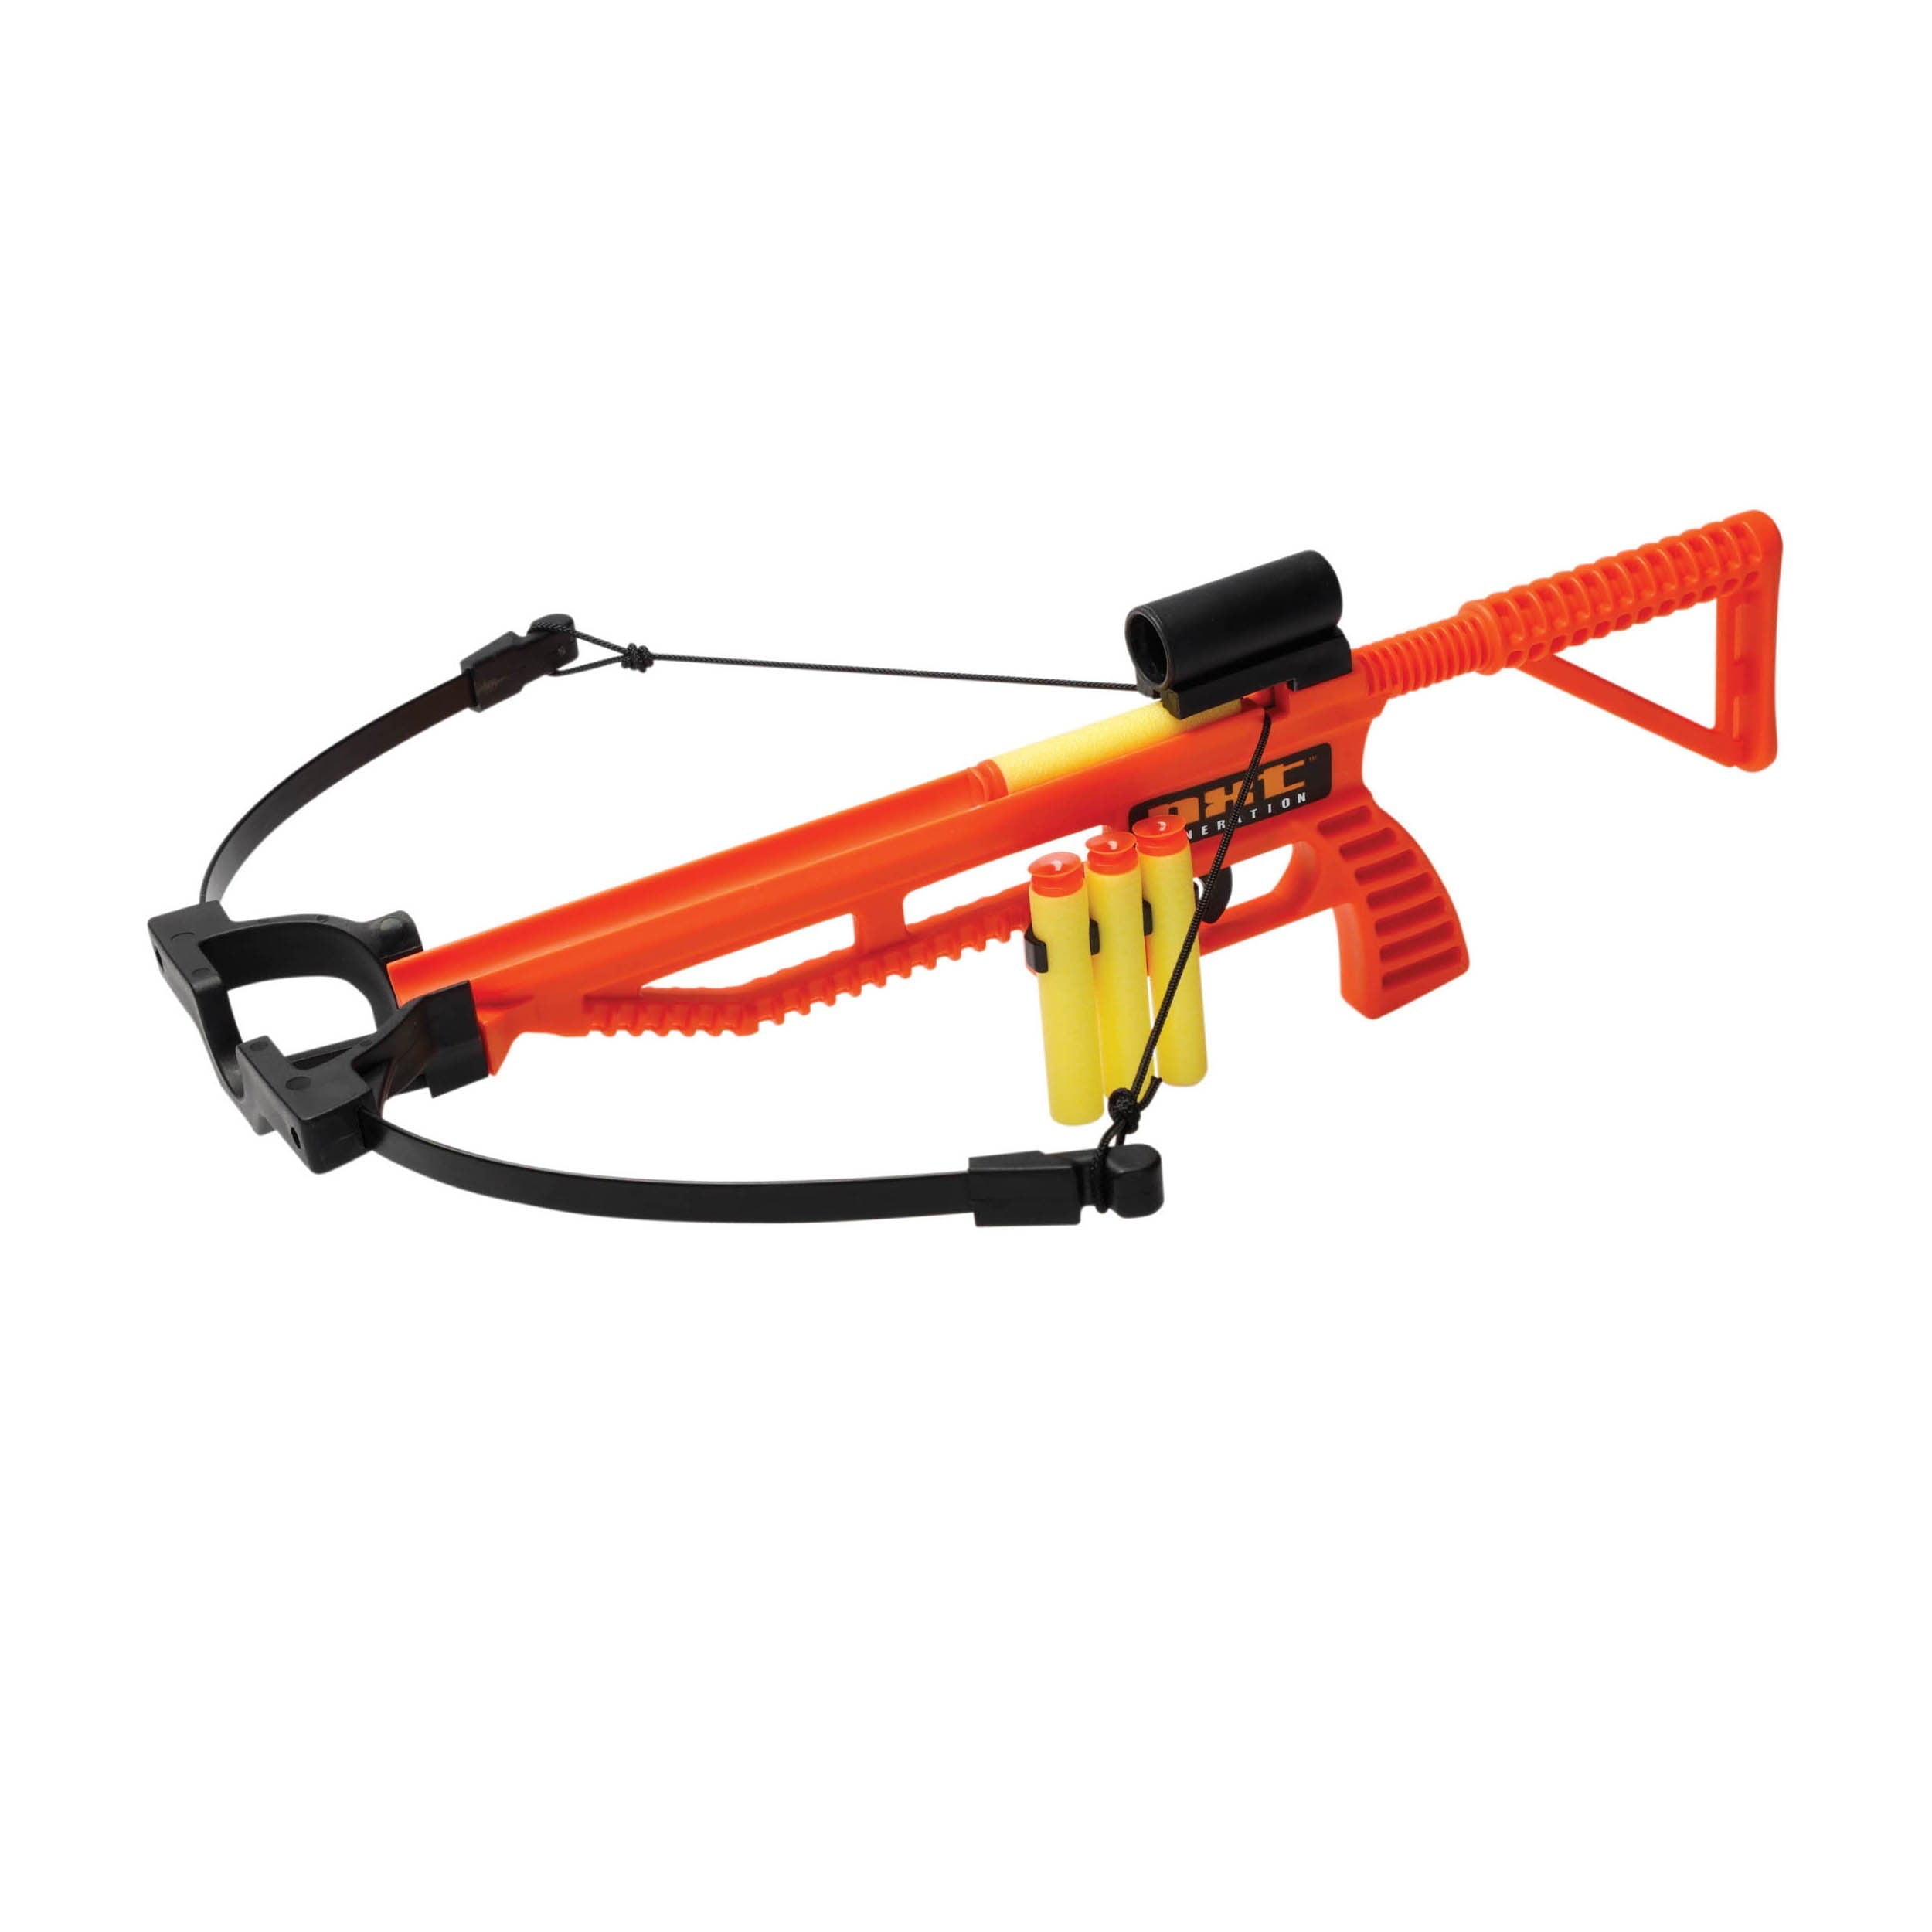 Target Archery Target Practice Toy for Teens NXT Generation Orange Blaze Tactical Crossbow and 3 Foam Suction Cup Projectiles